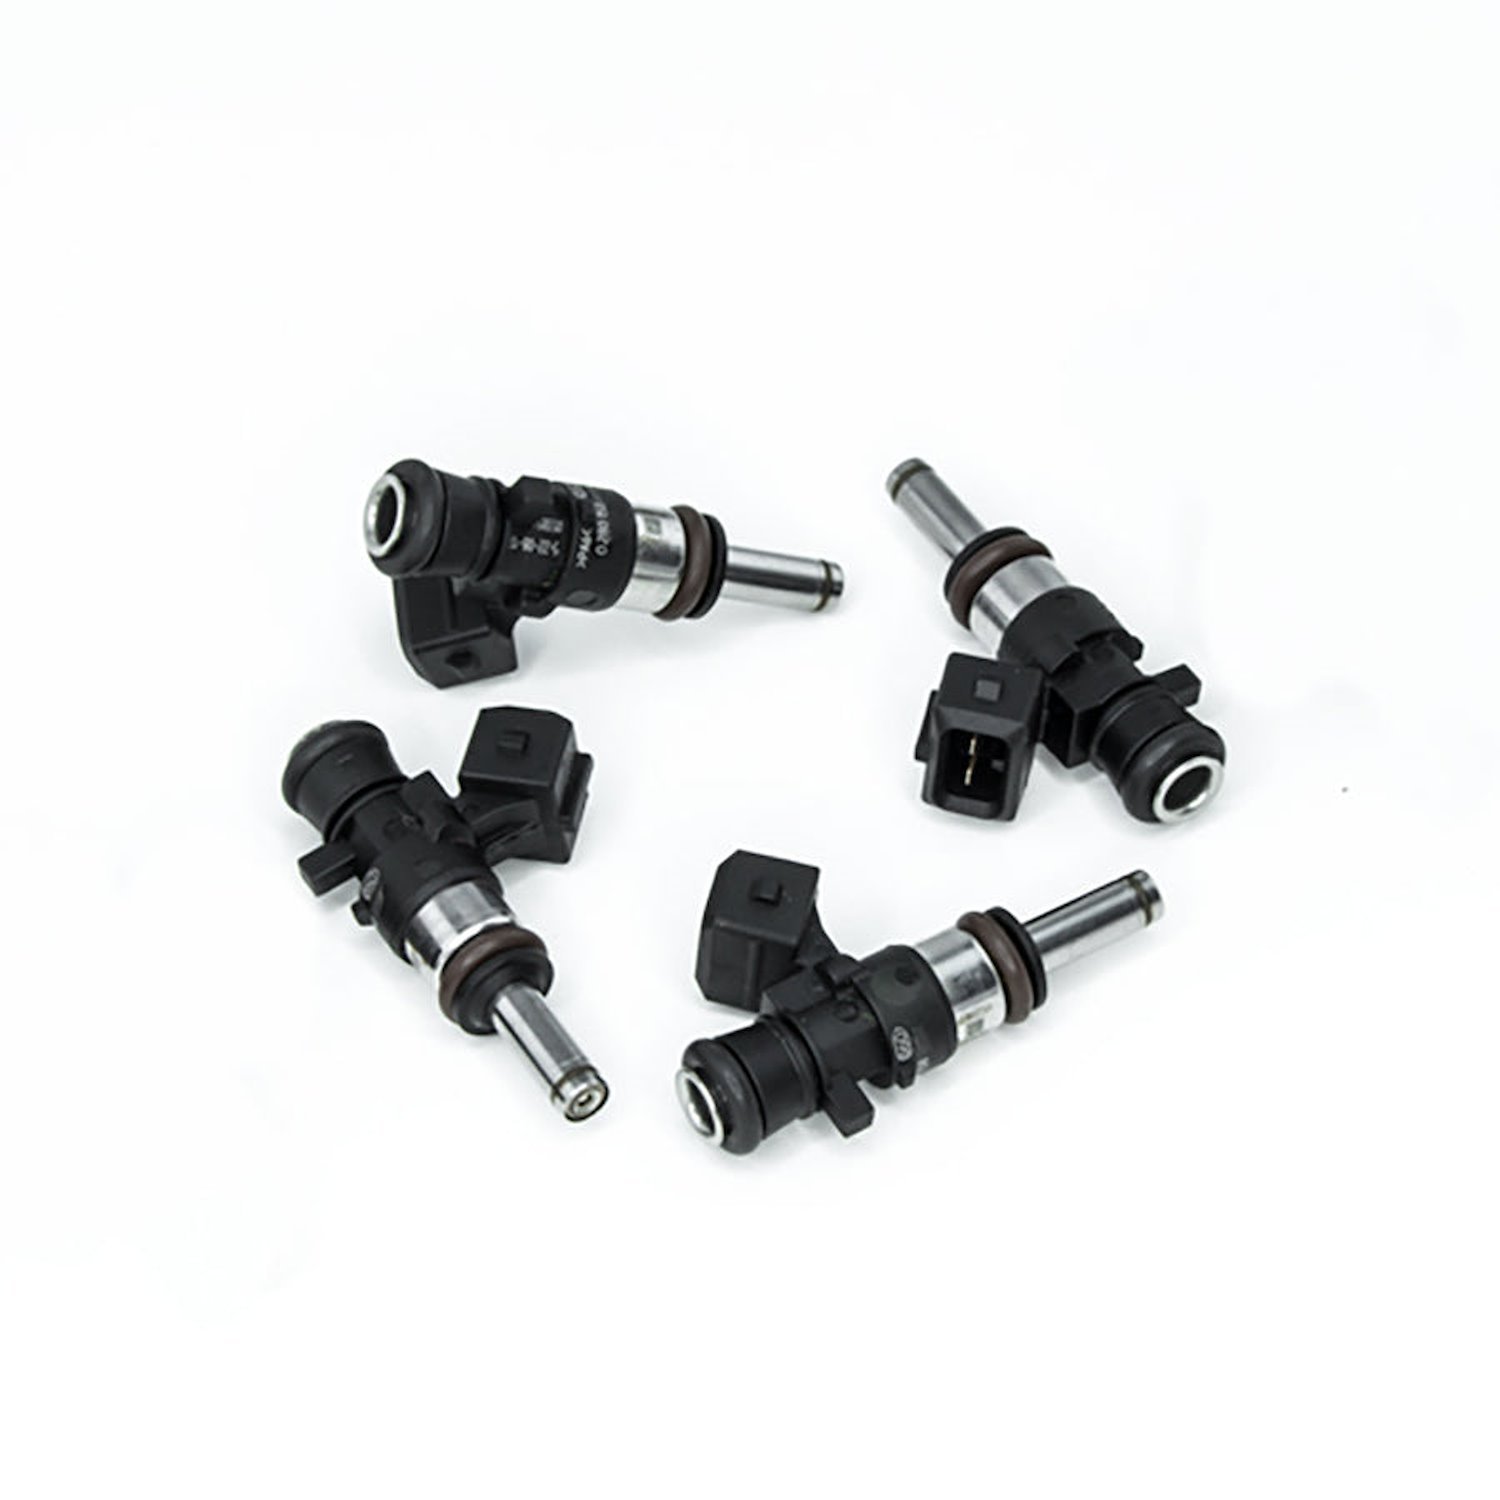 16MX0012004 Bosch EV14 Compact Matched Injectors 1200cc (extended nozzle) Universal